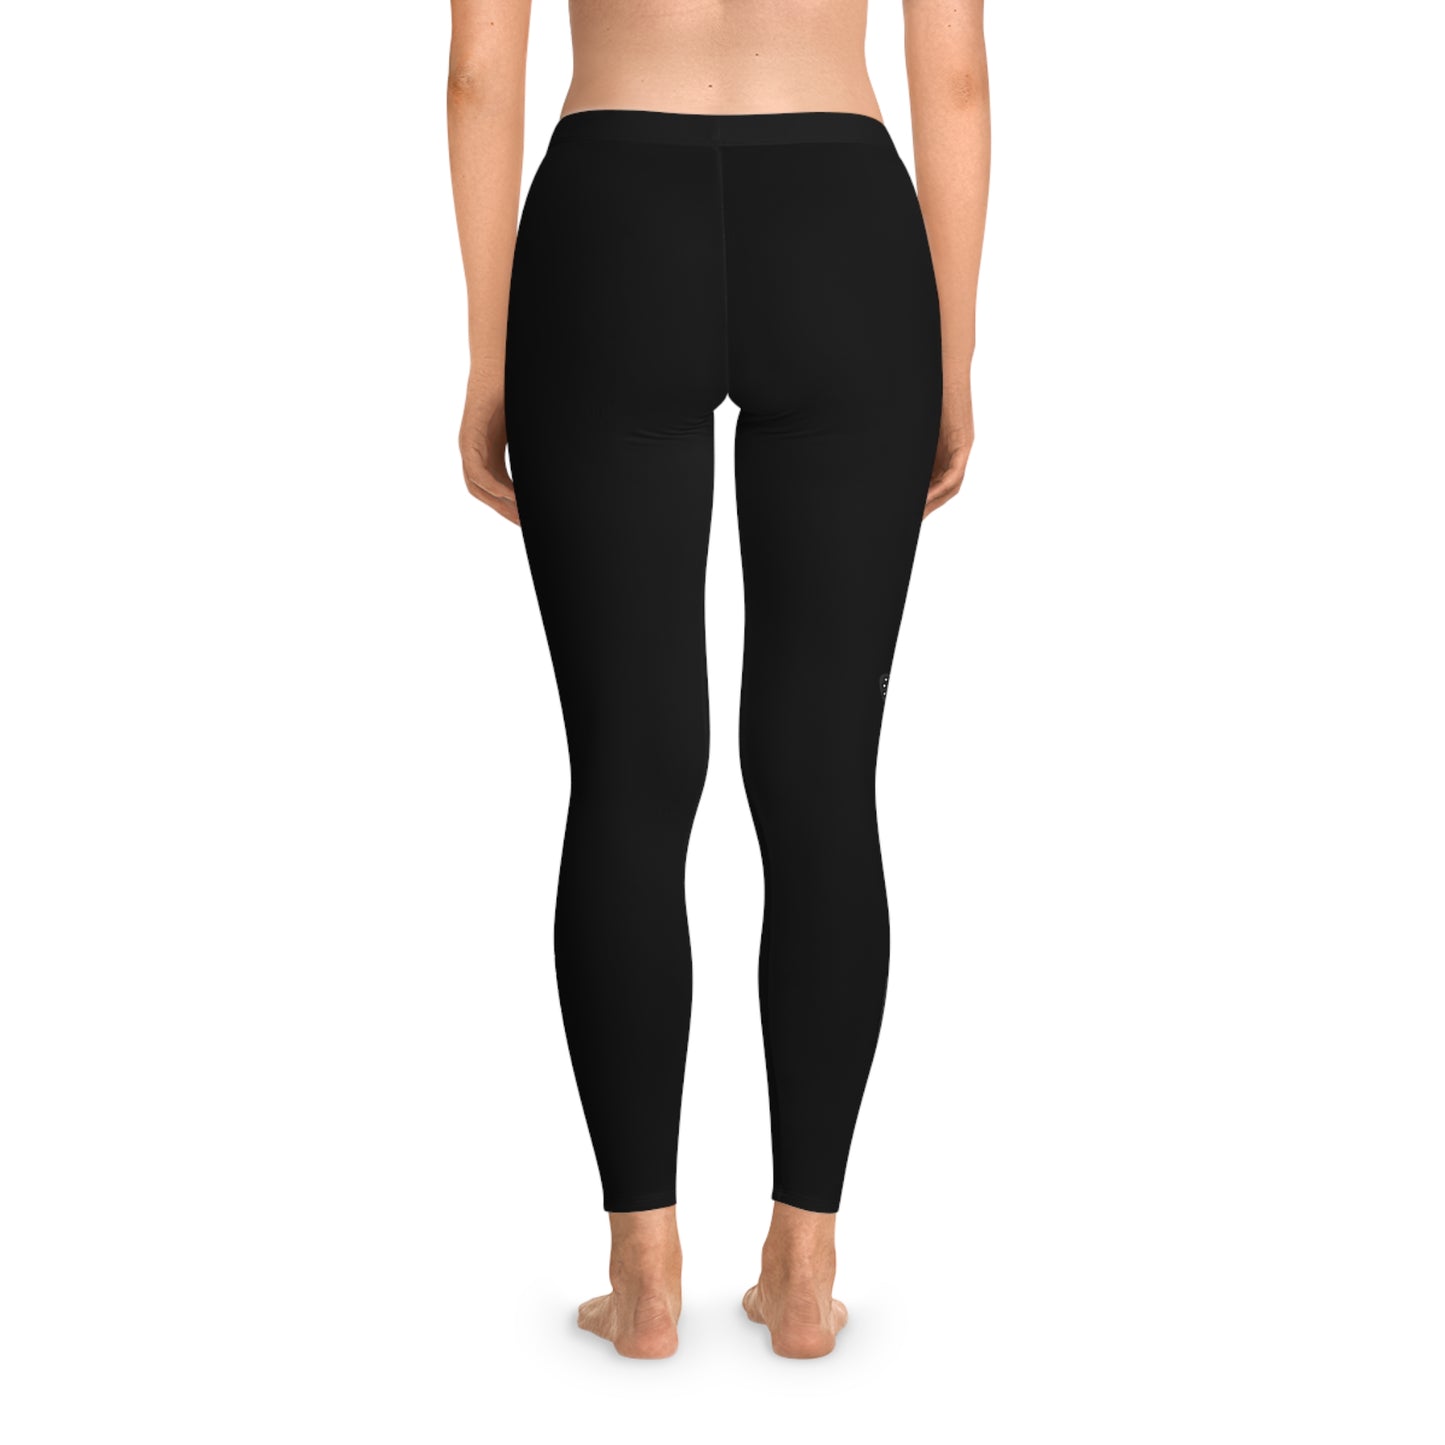 BUTTTERFLY Stretchy Leggings